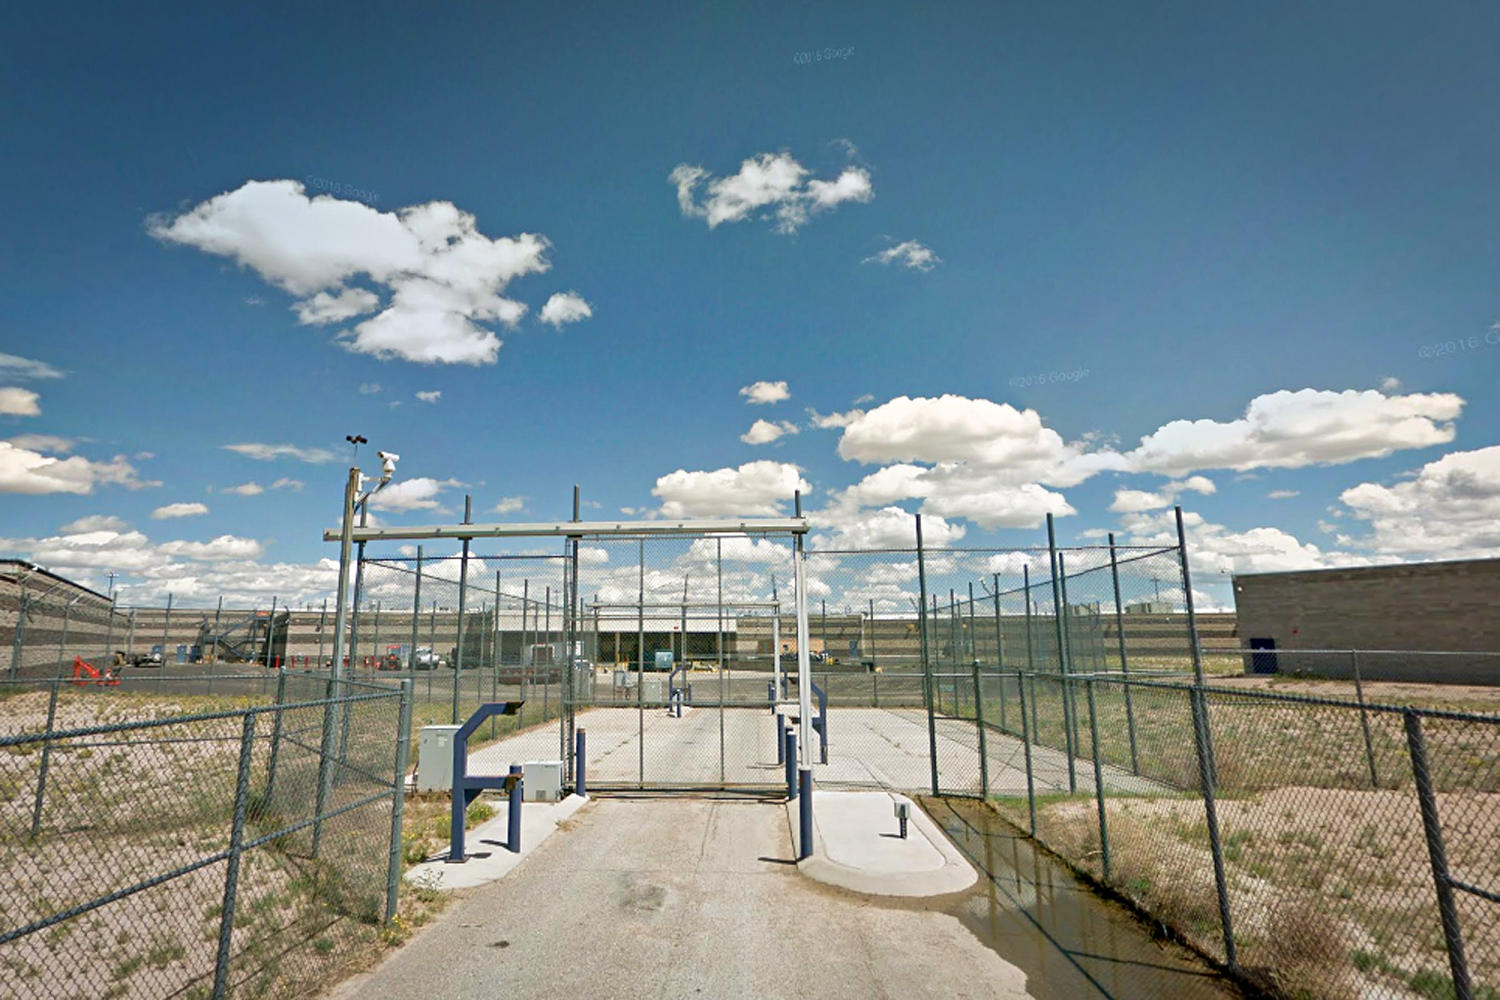 Three inmates have been mistakenly released from a New Mexico jail in July